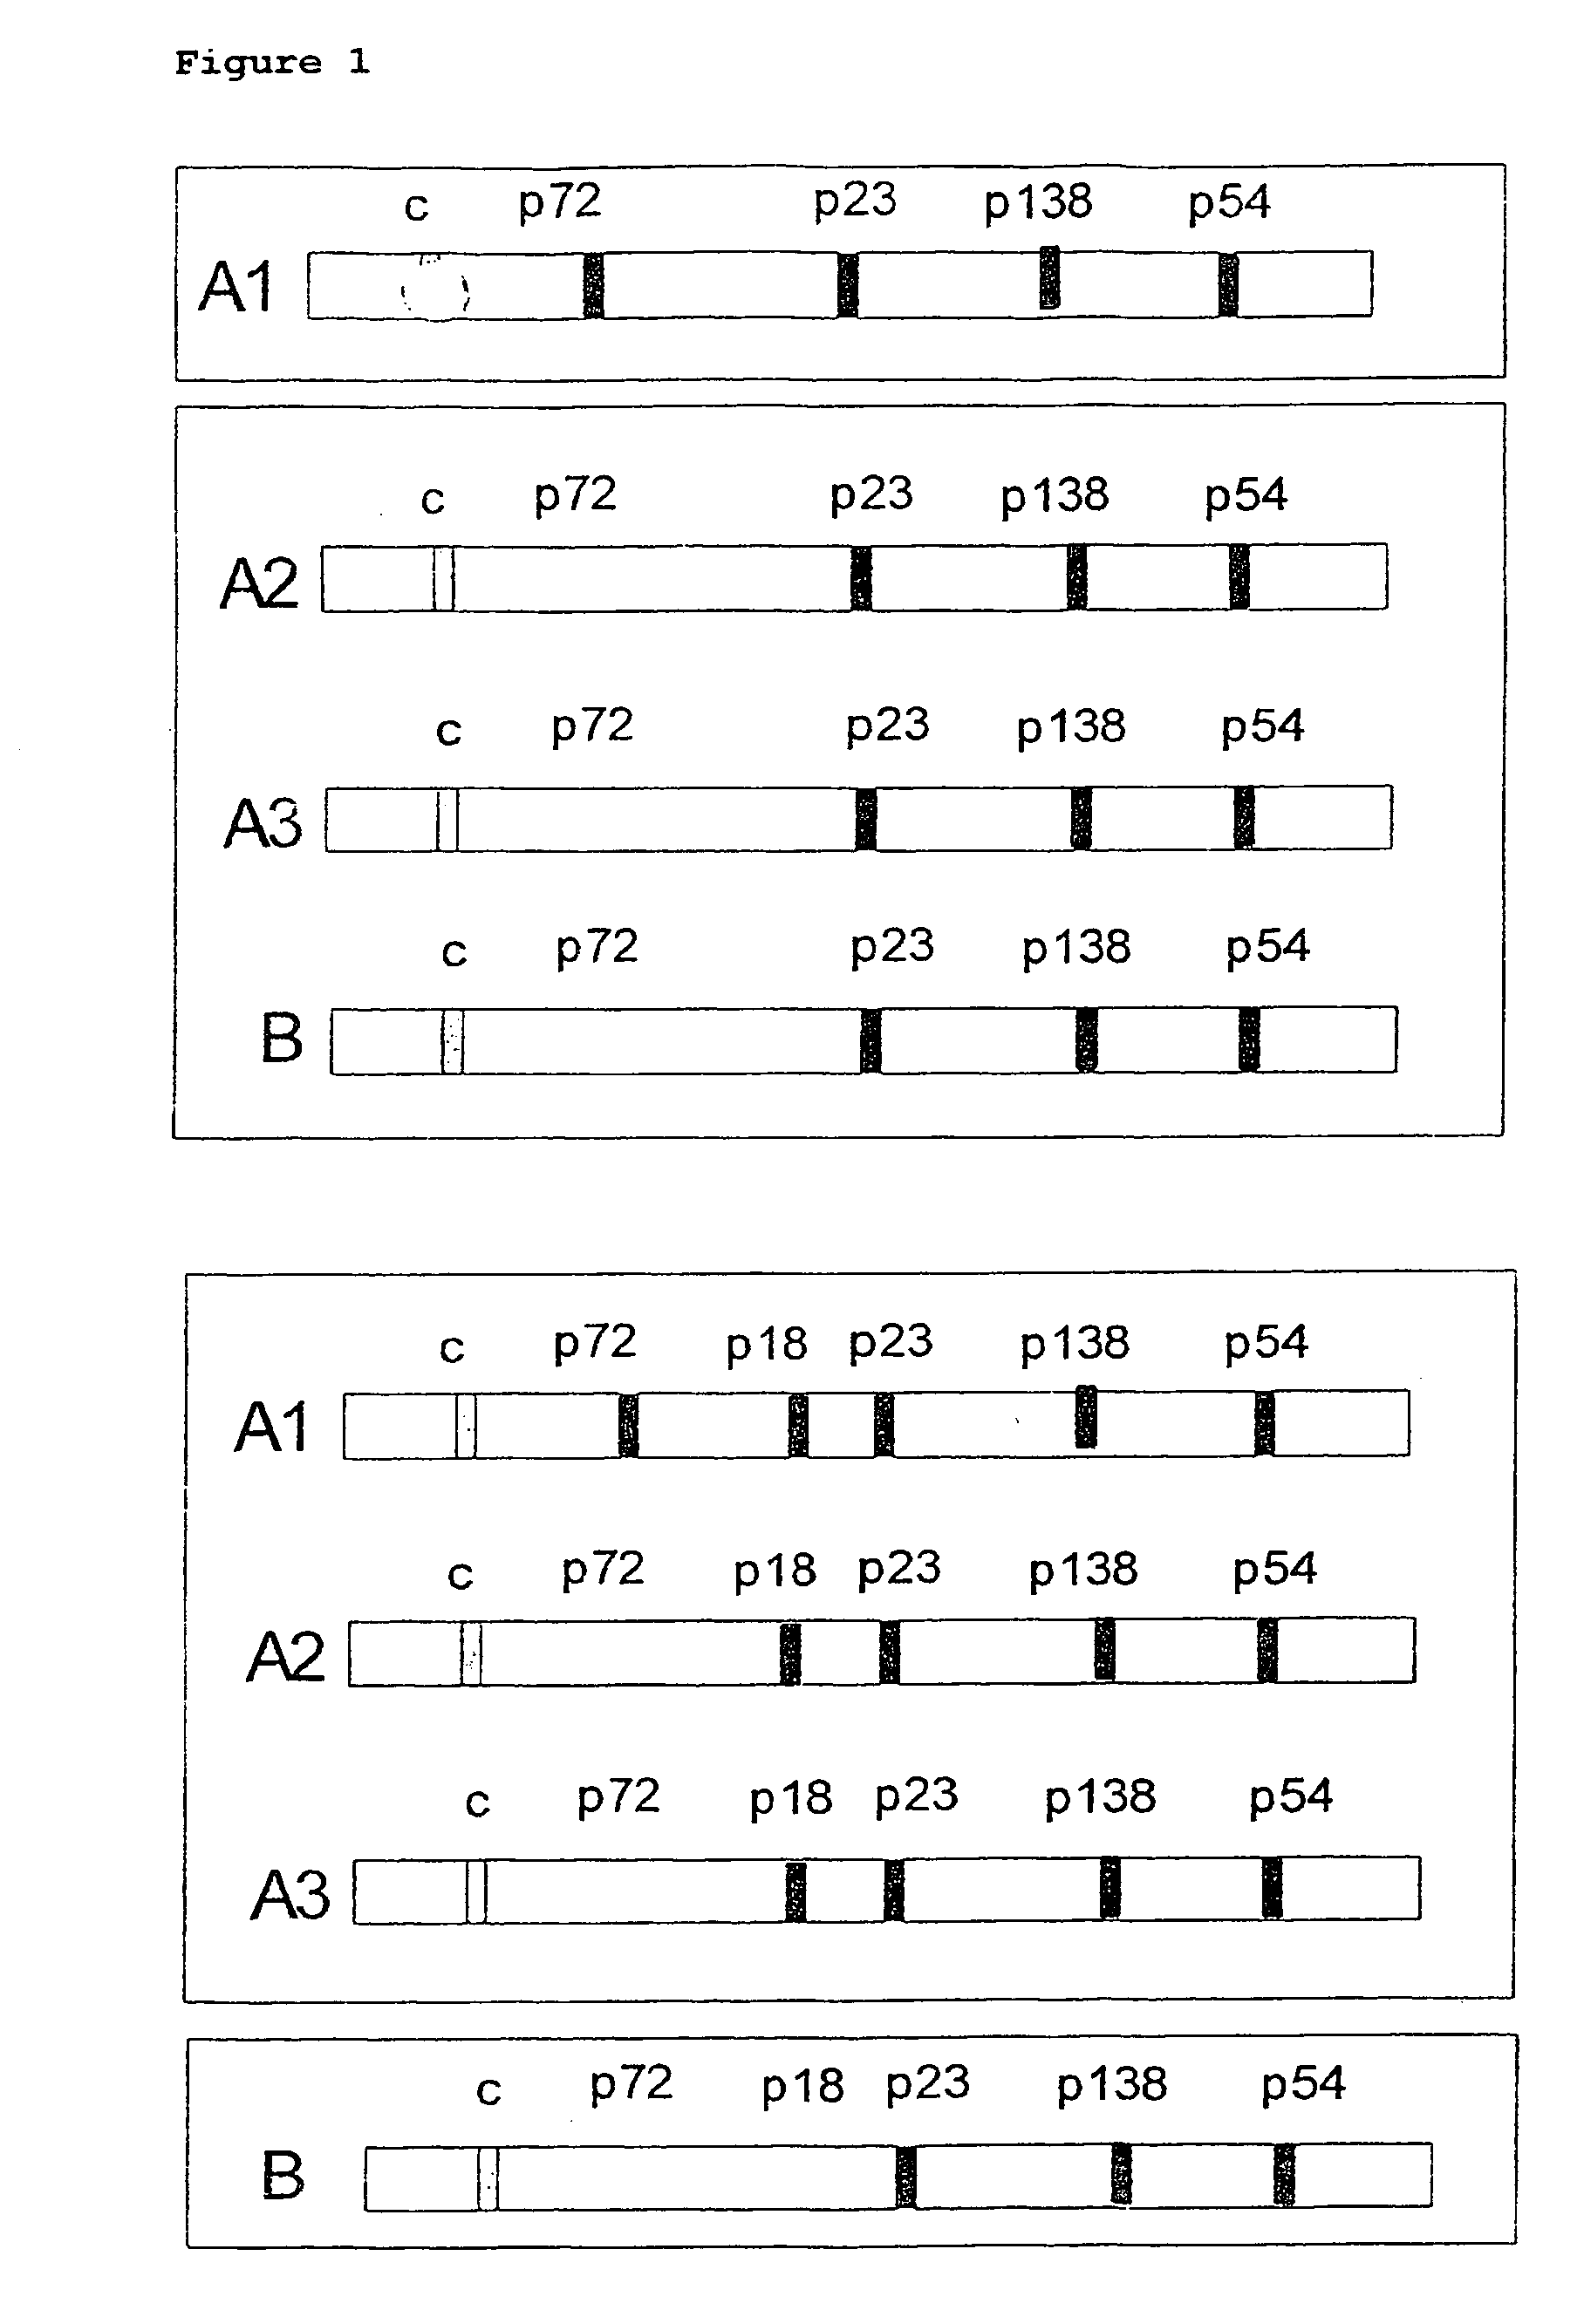 Peptides derived from capsid antigens of the Epstein-Barr virus and the use thereof